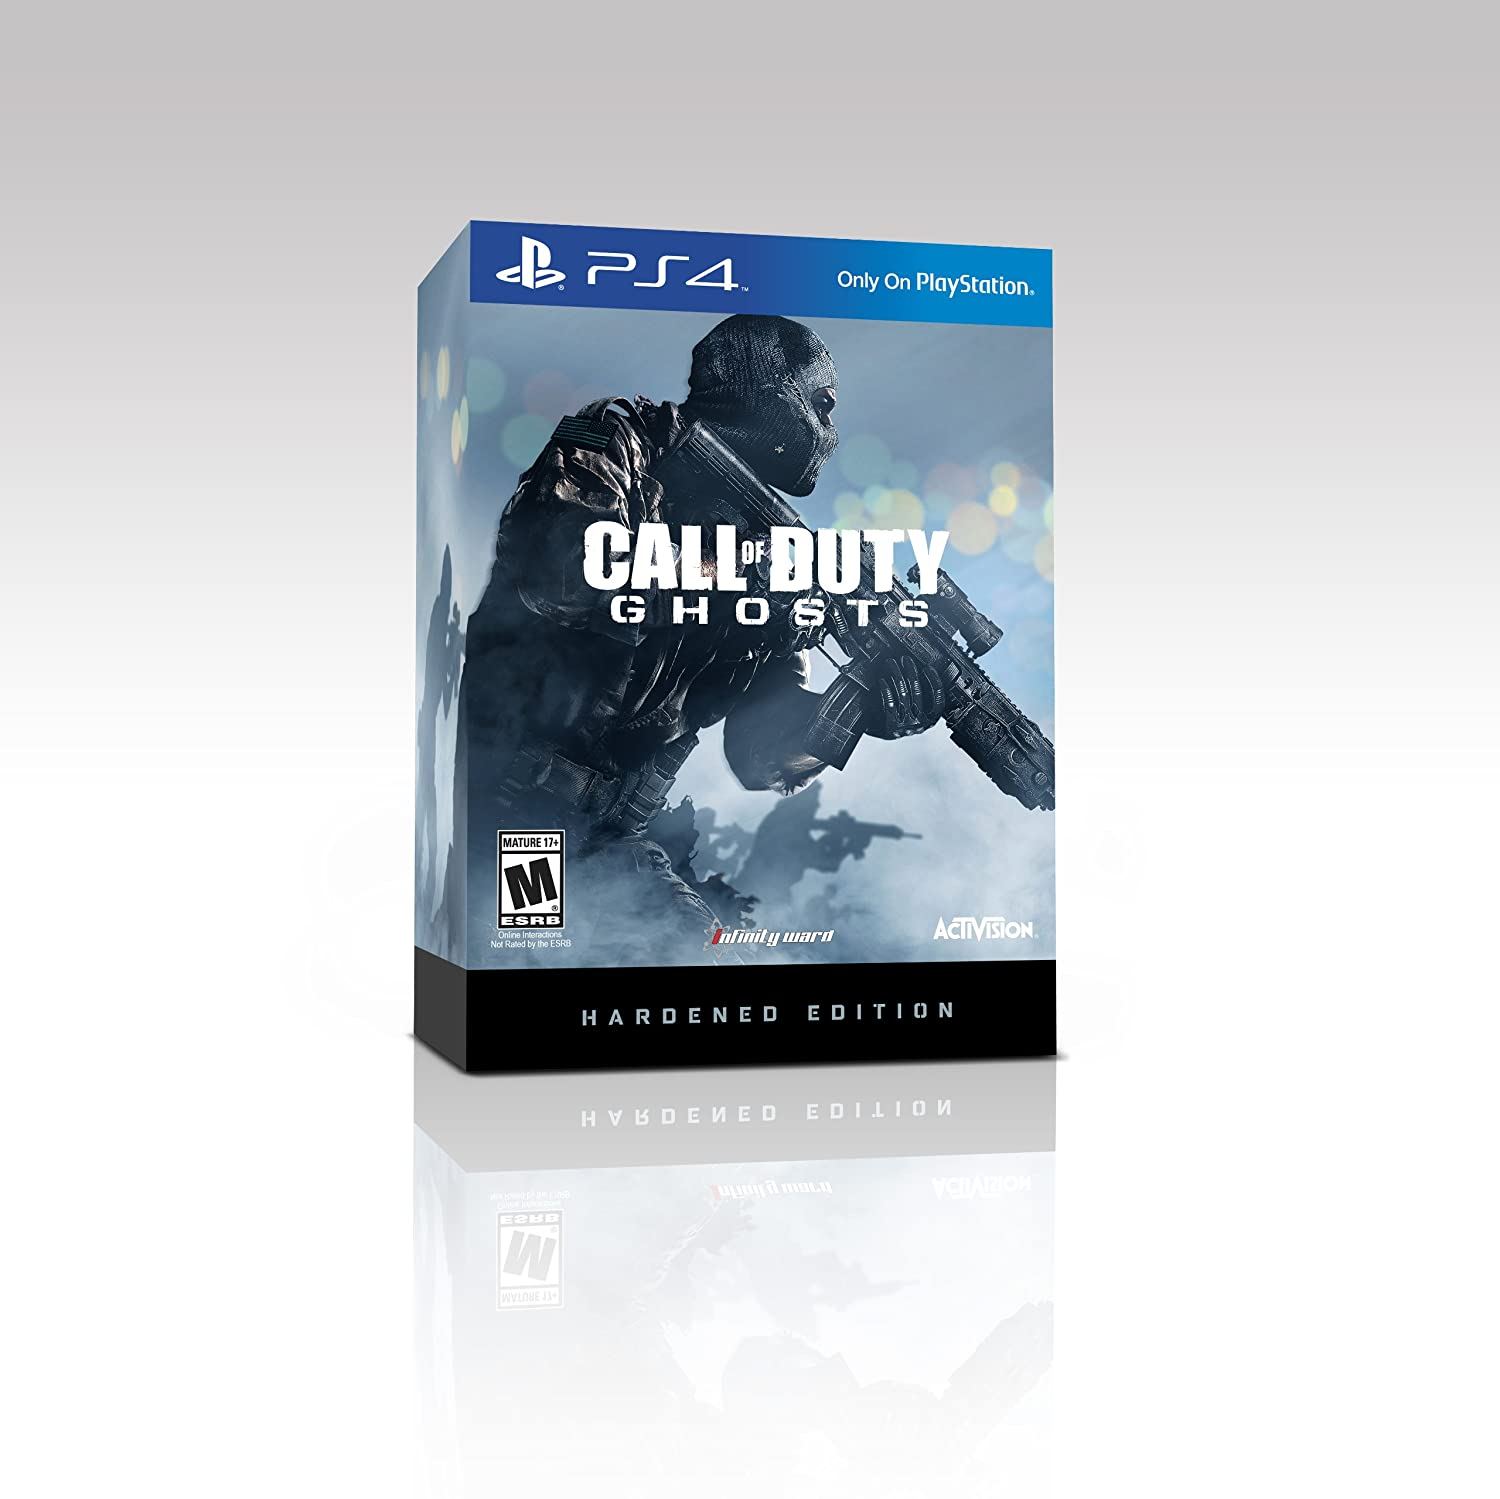 Playstation 4 - Call of Duty: Ghosts